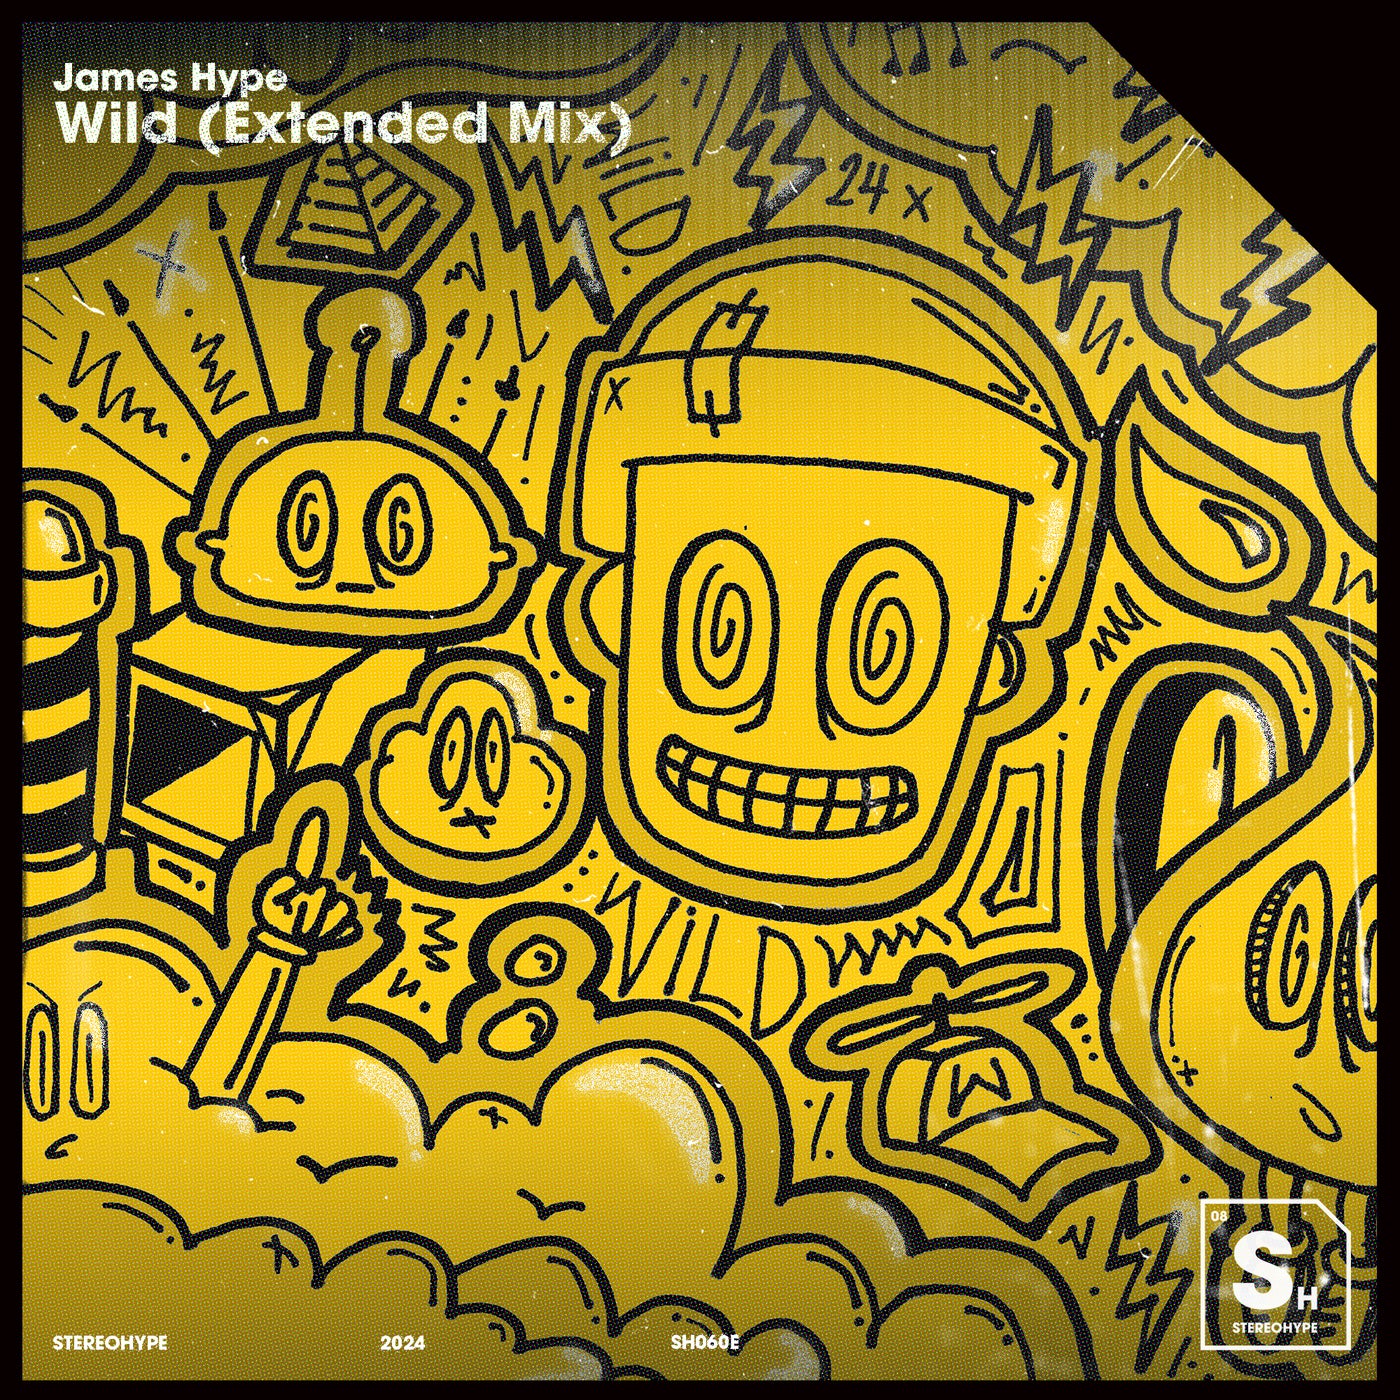 image cover: James Hype - Wild (Extended Mix) on STEREOHYPE